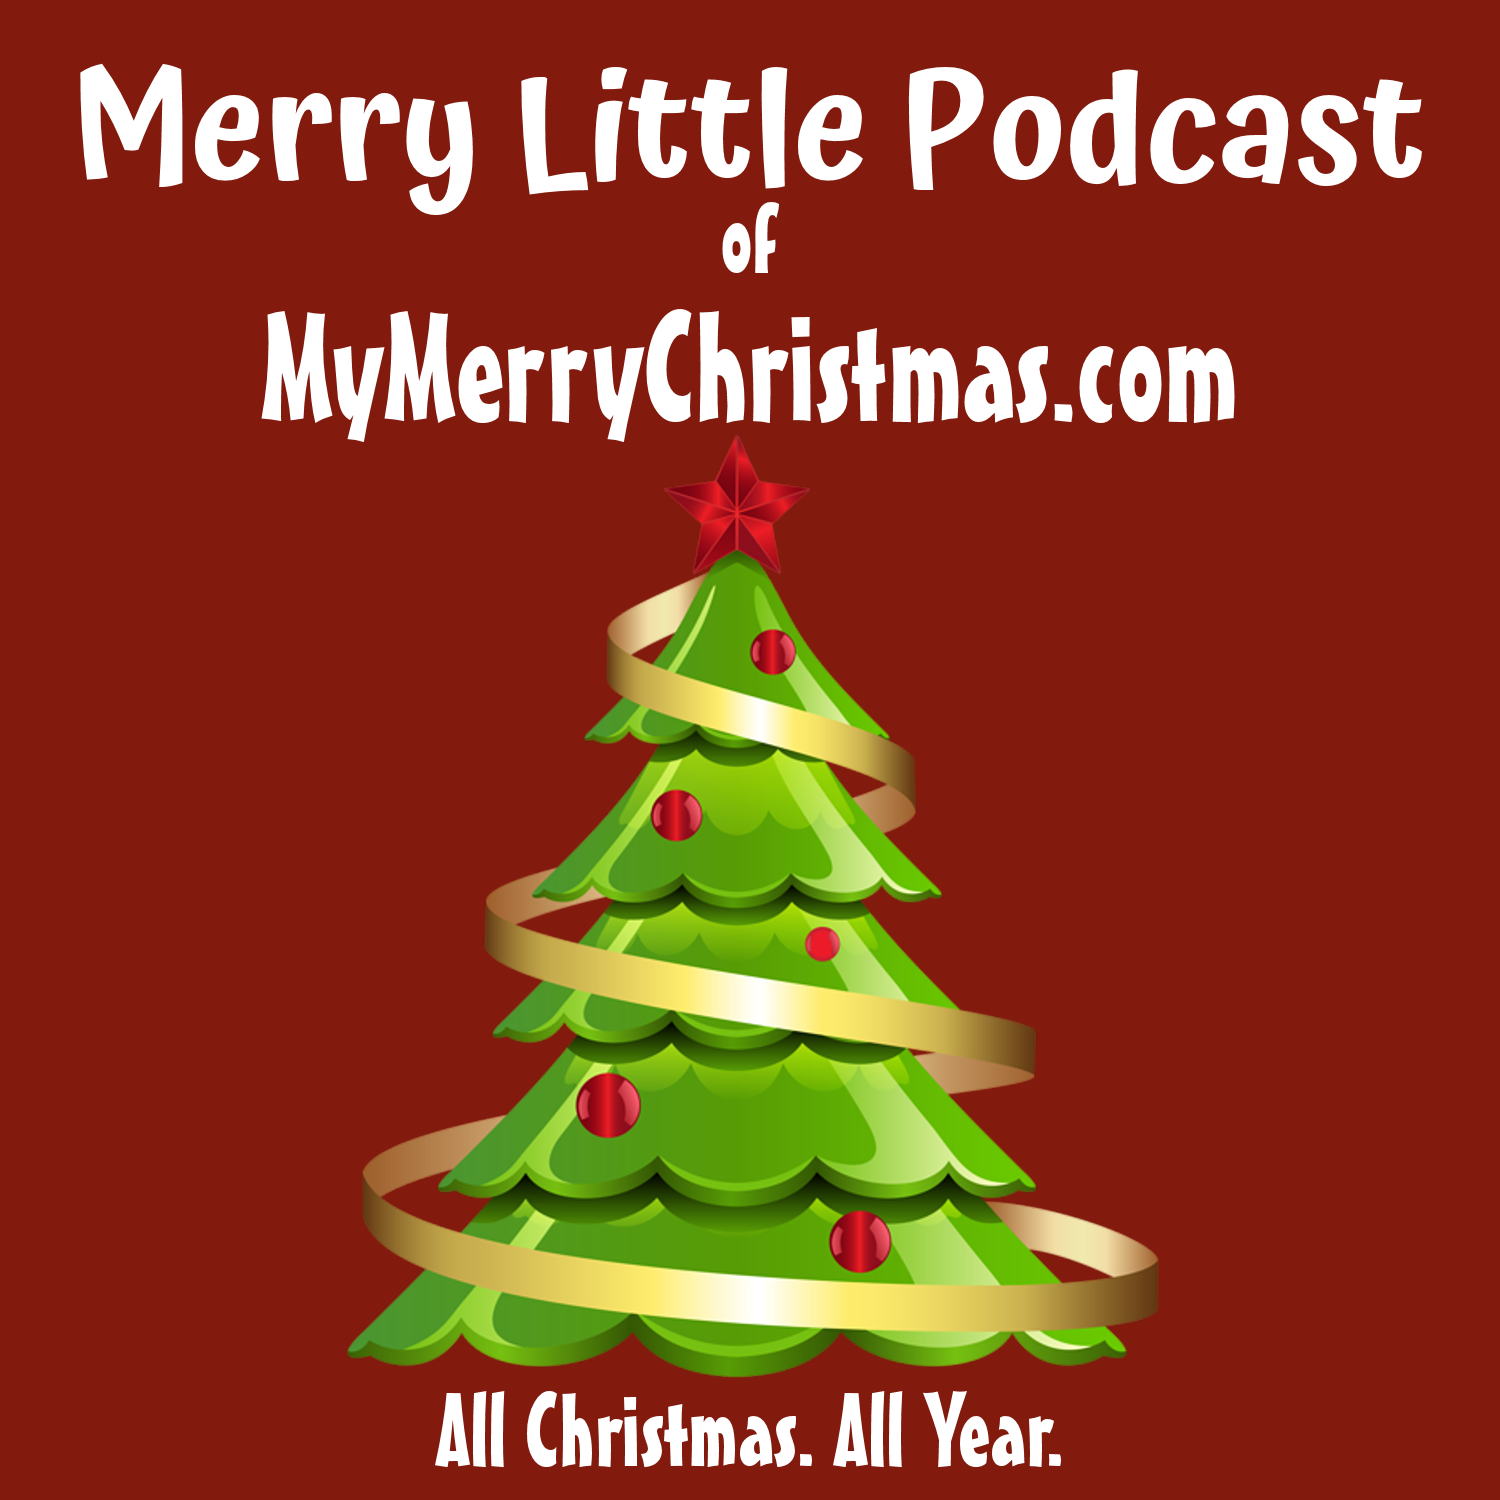 Merry Little Podcast